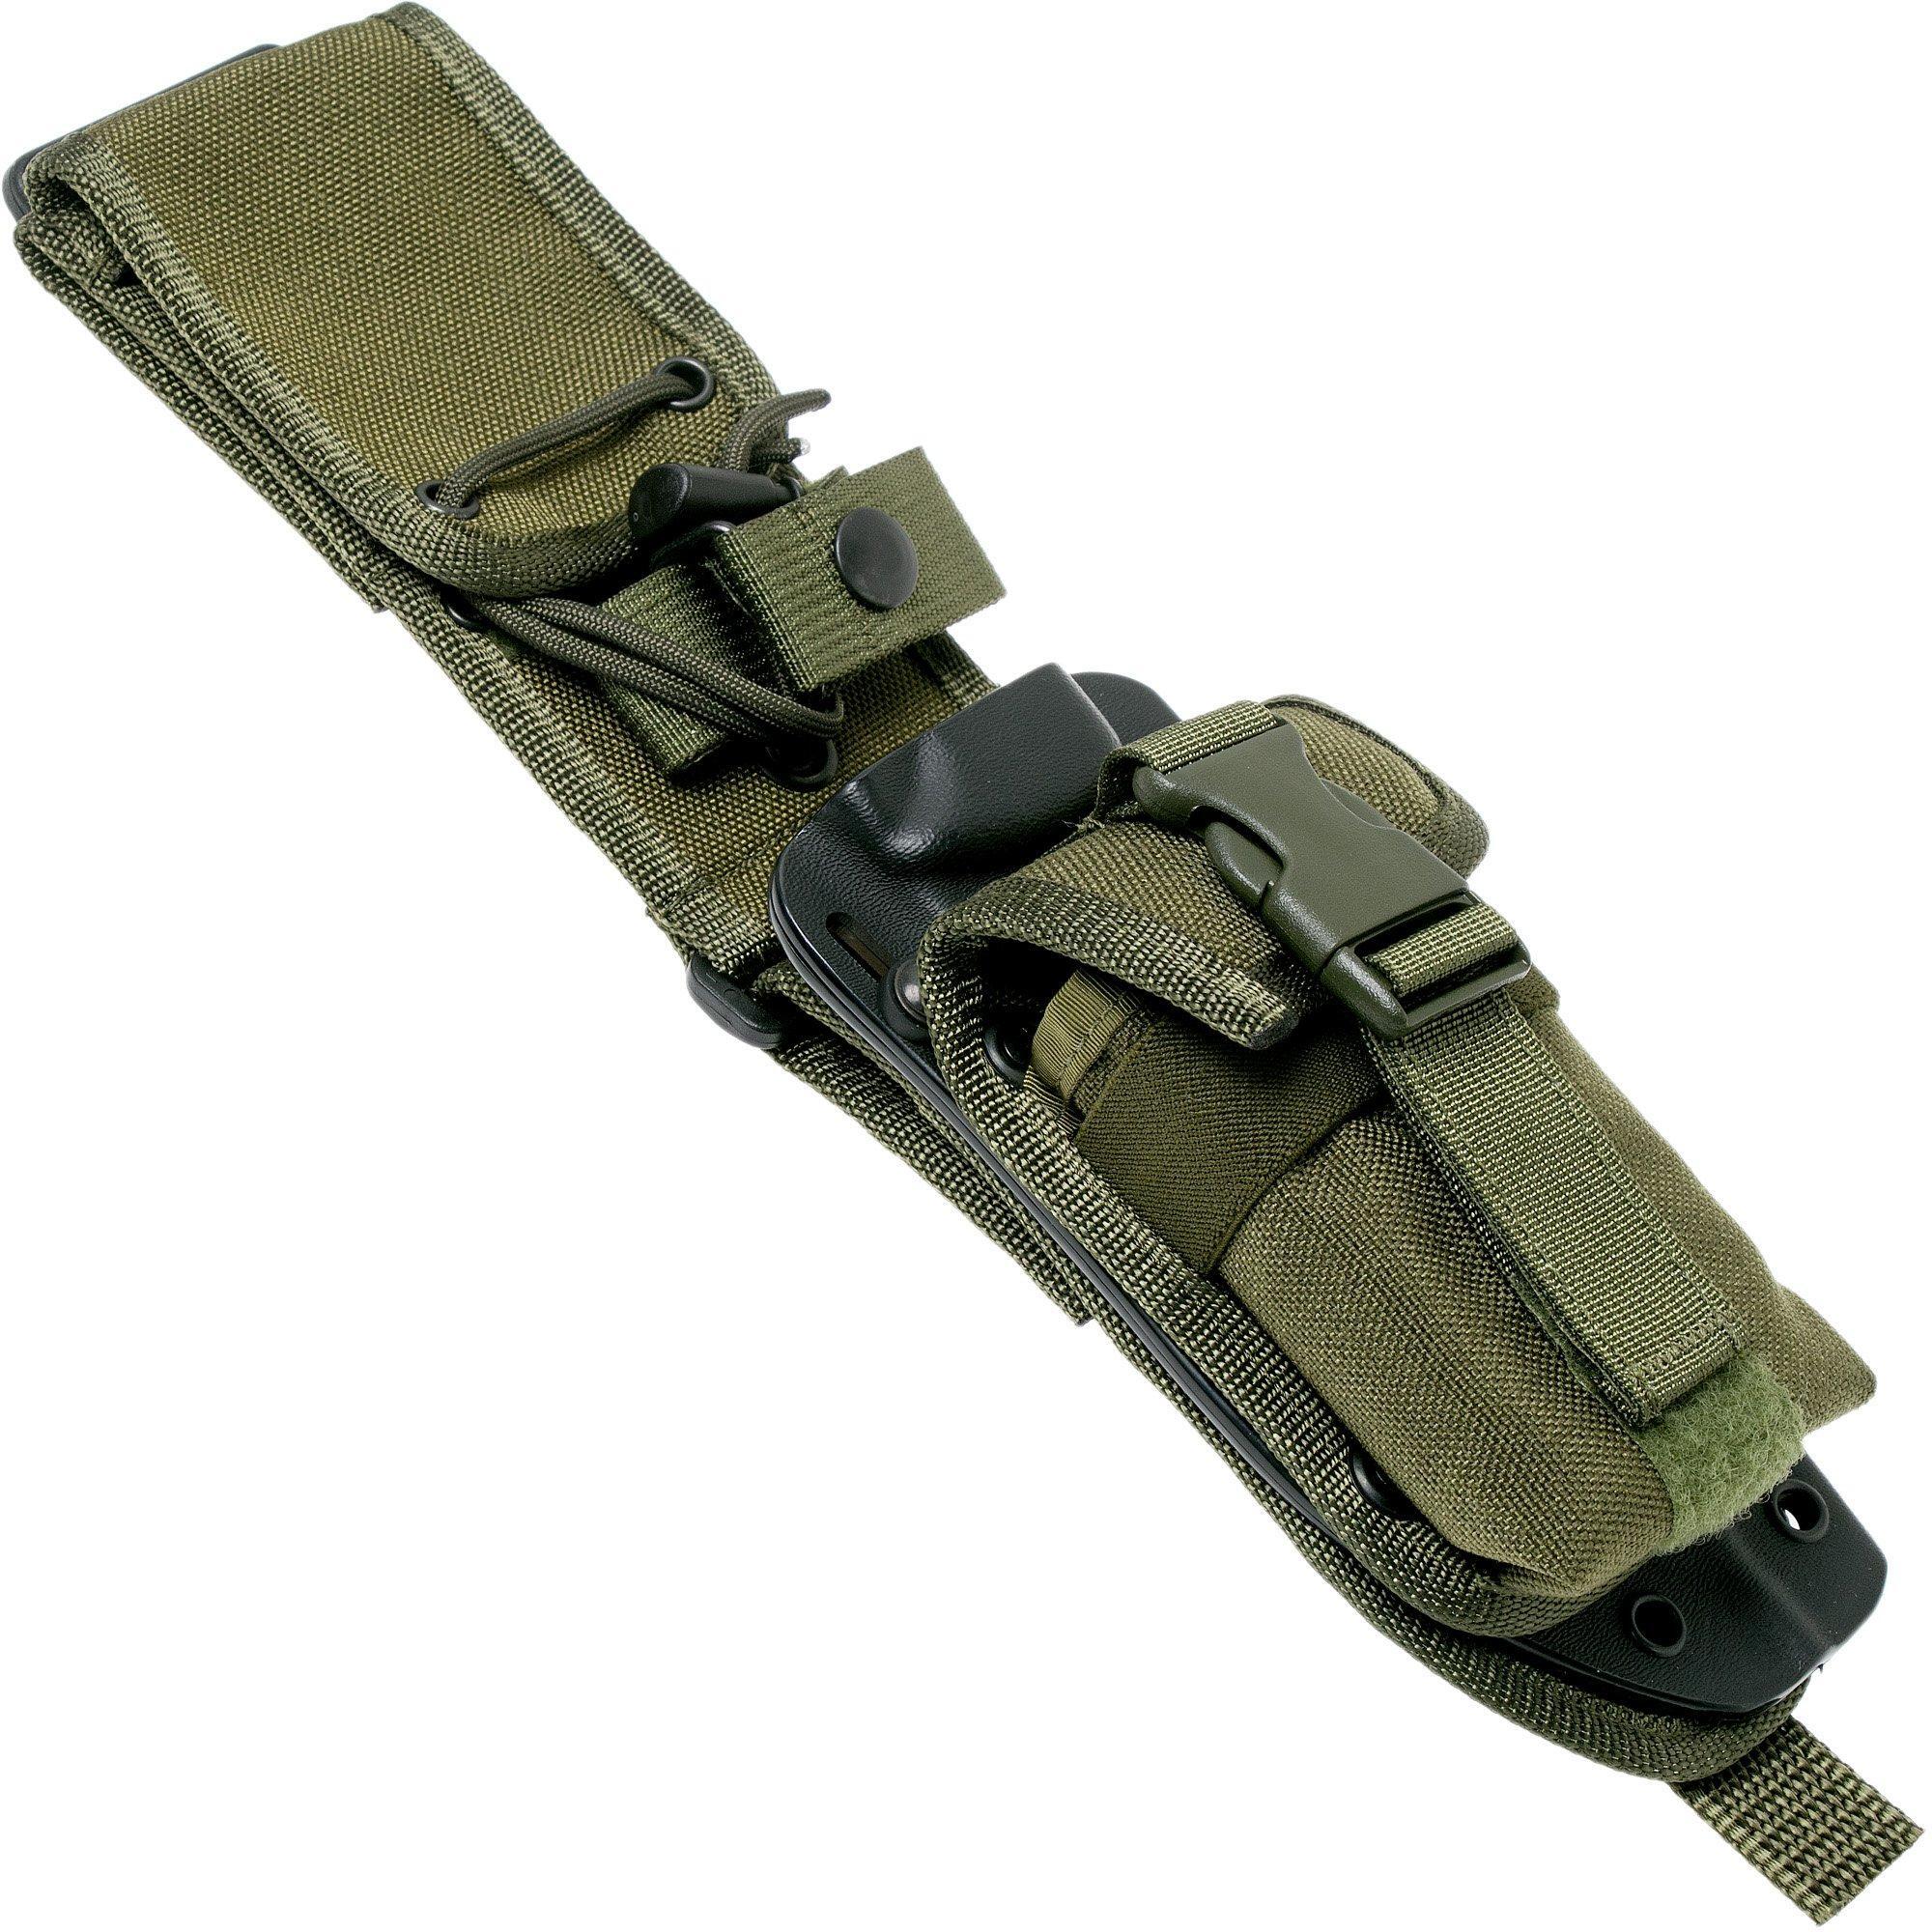 ESEE ESEE model 5 schede met MOLLE-back, Pouch, 5-MBSP-OD OD Green